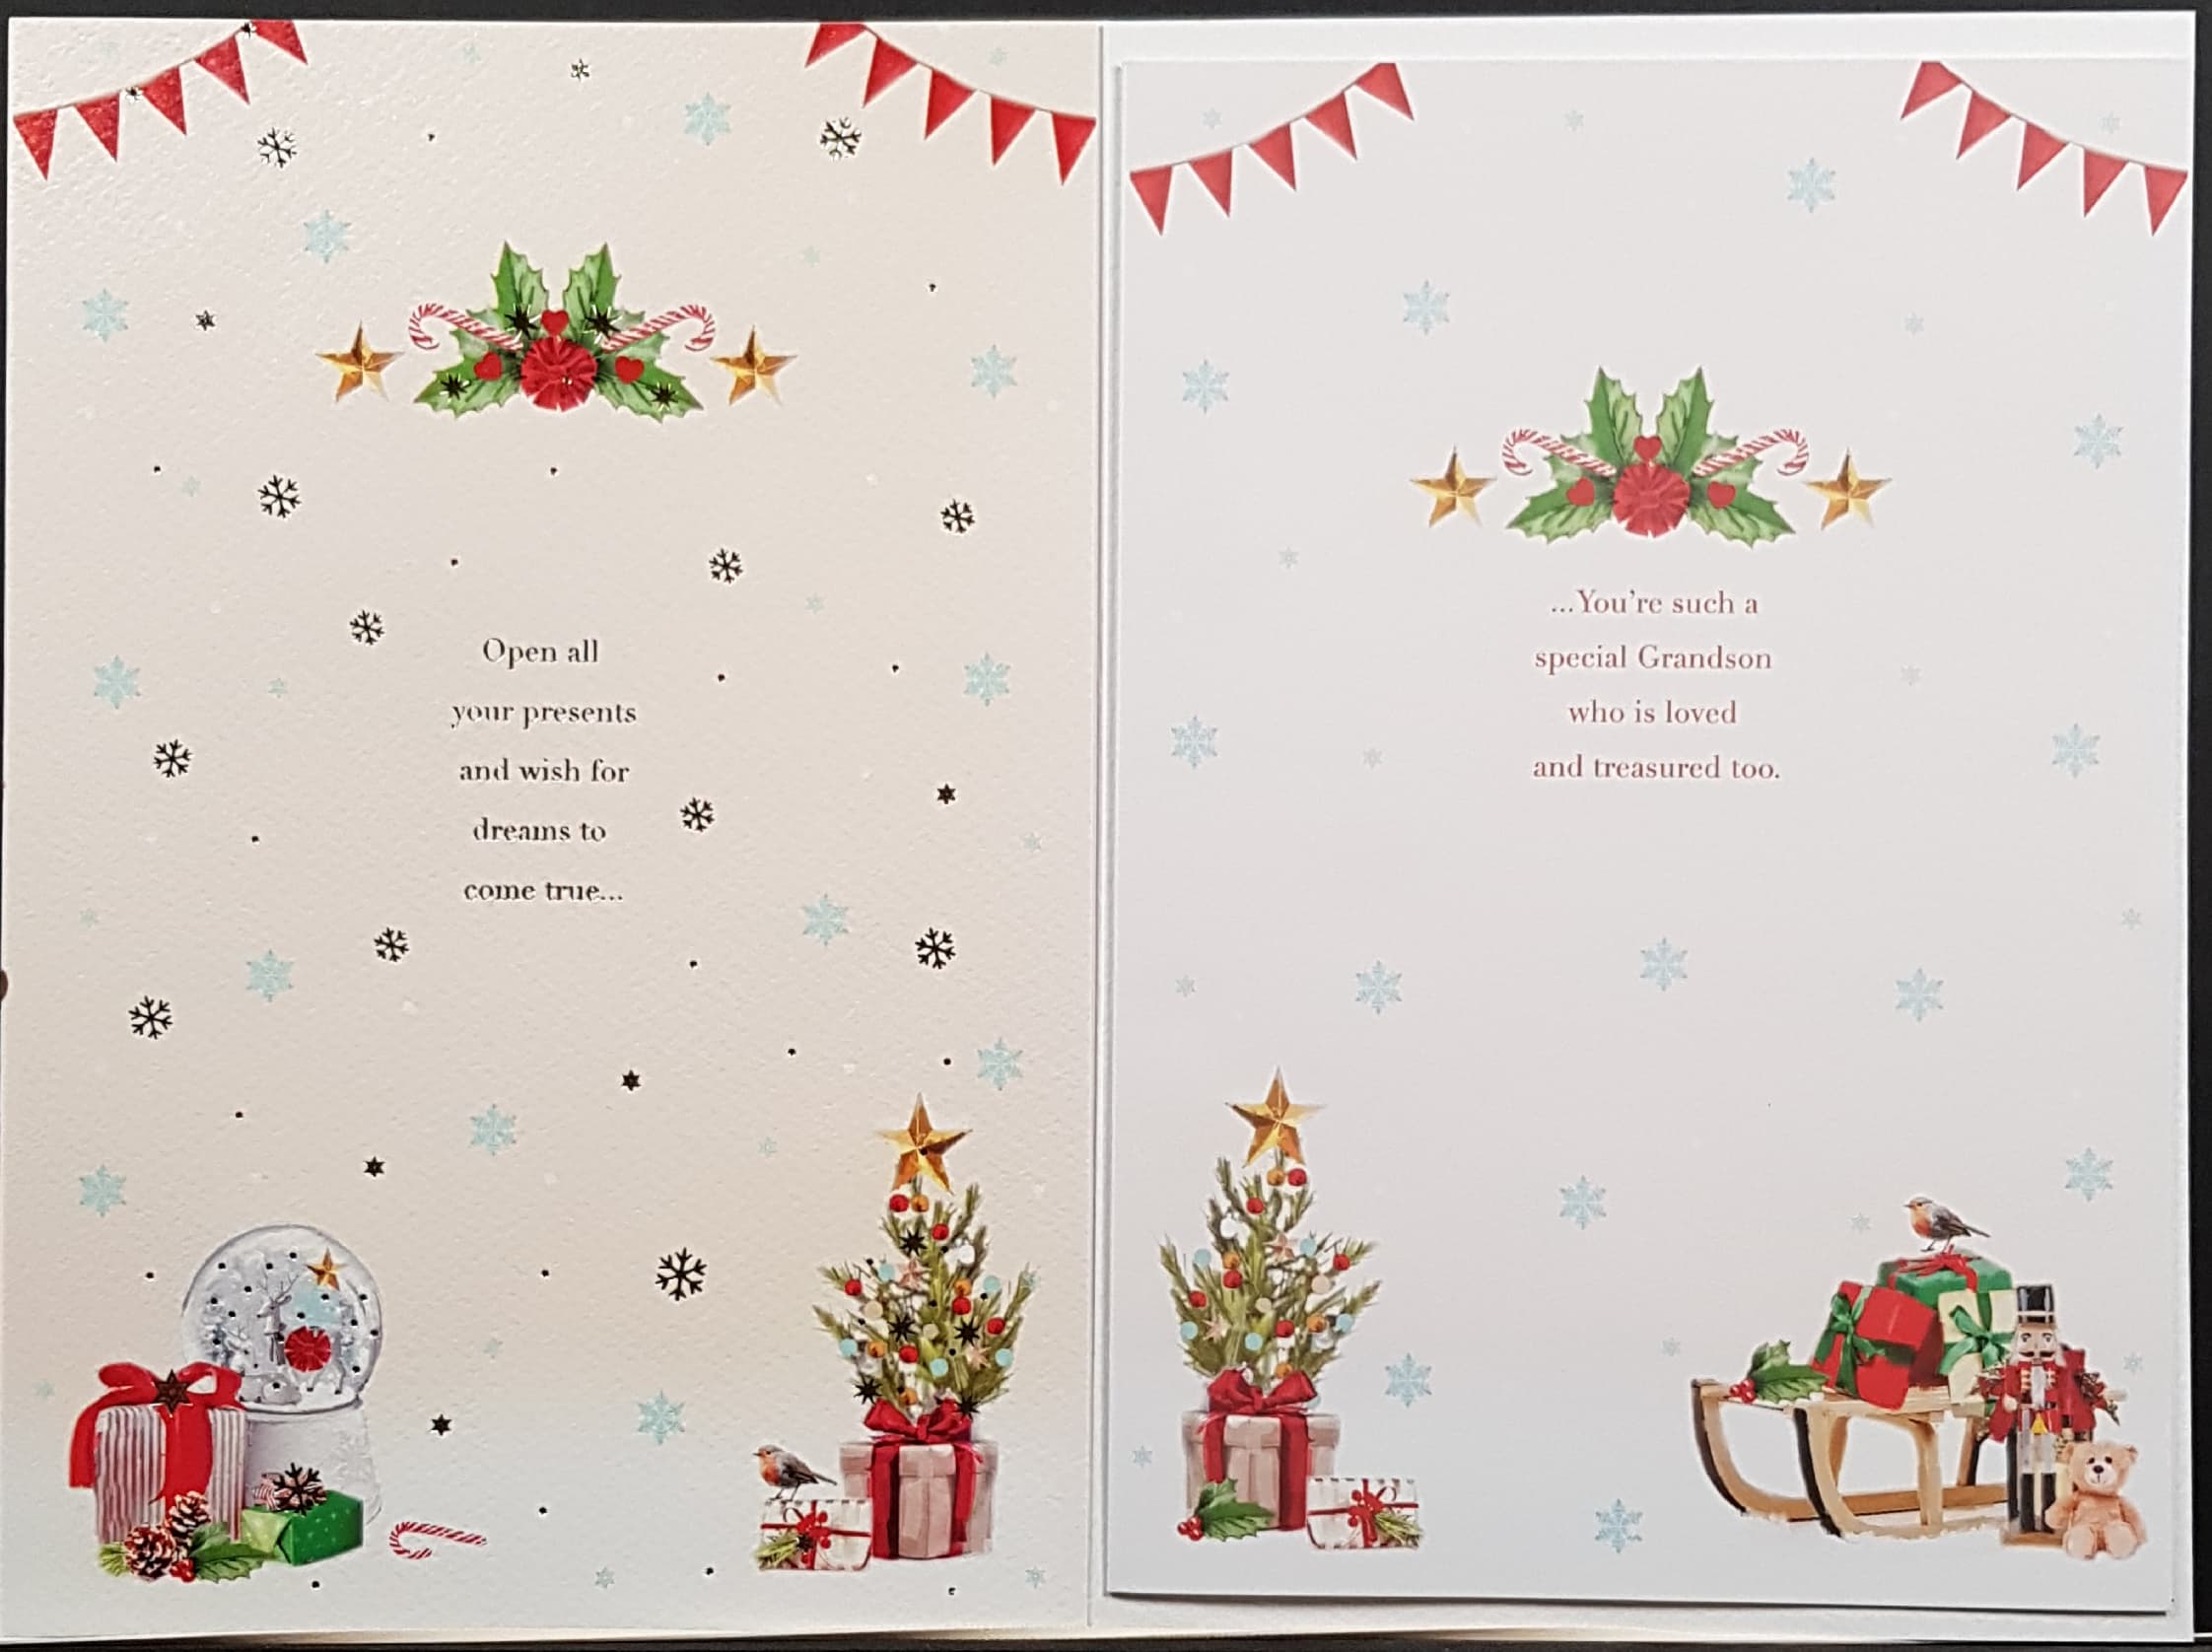 Grandson Christmas Card -  Laughter and Happiness & Santa Taking out Gifts